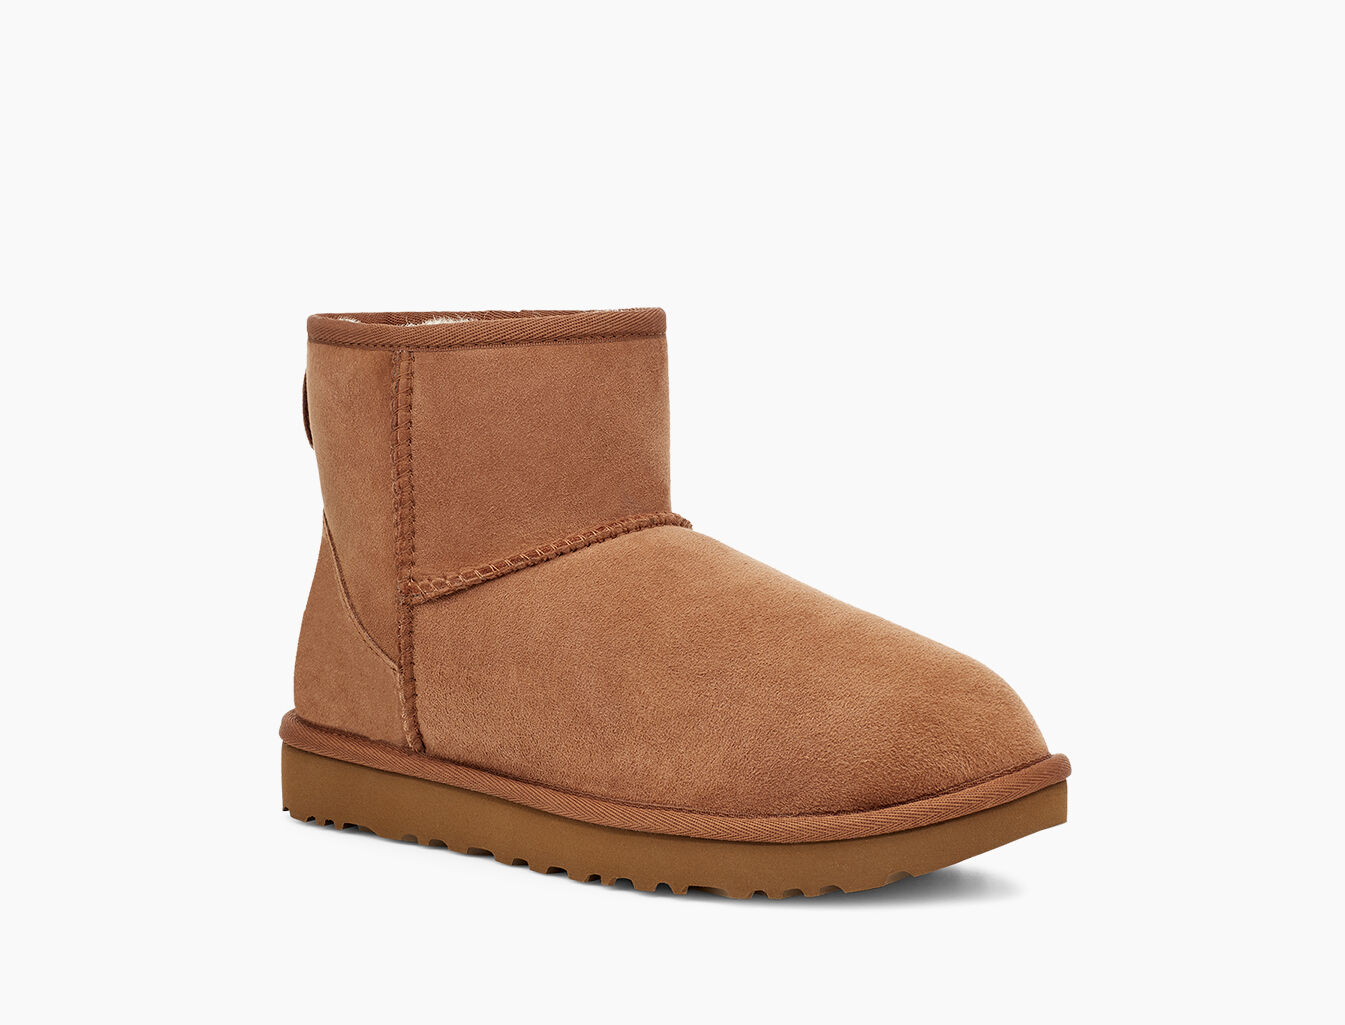 cheapest place to buy uggs online